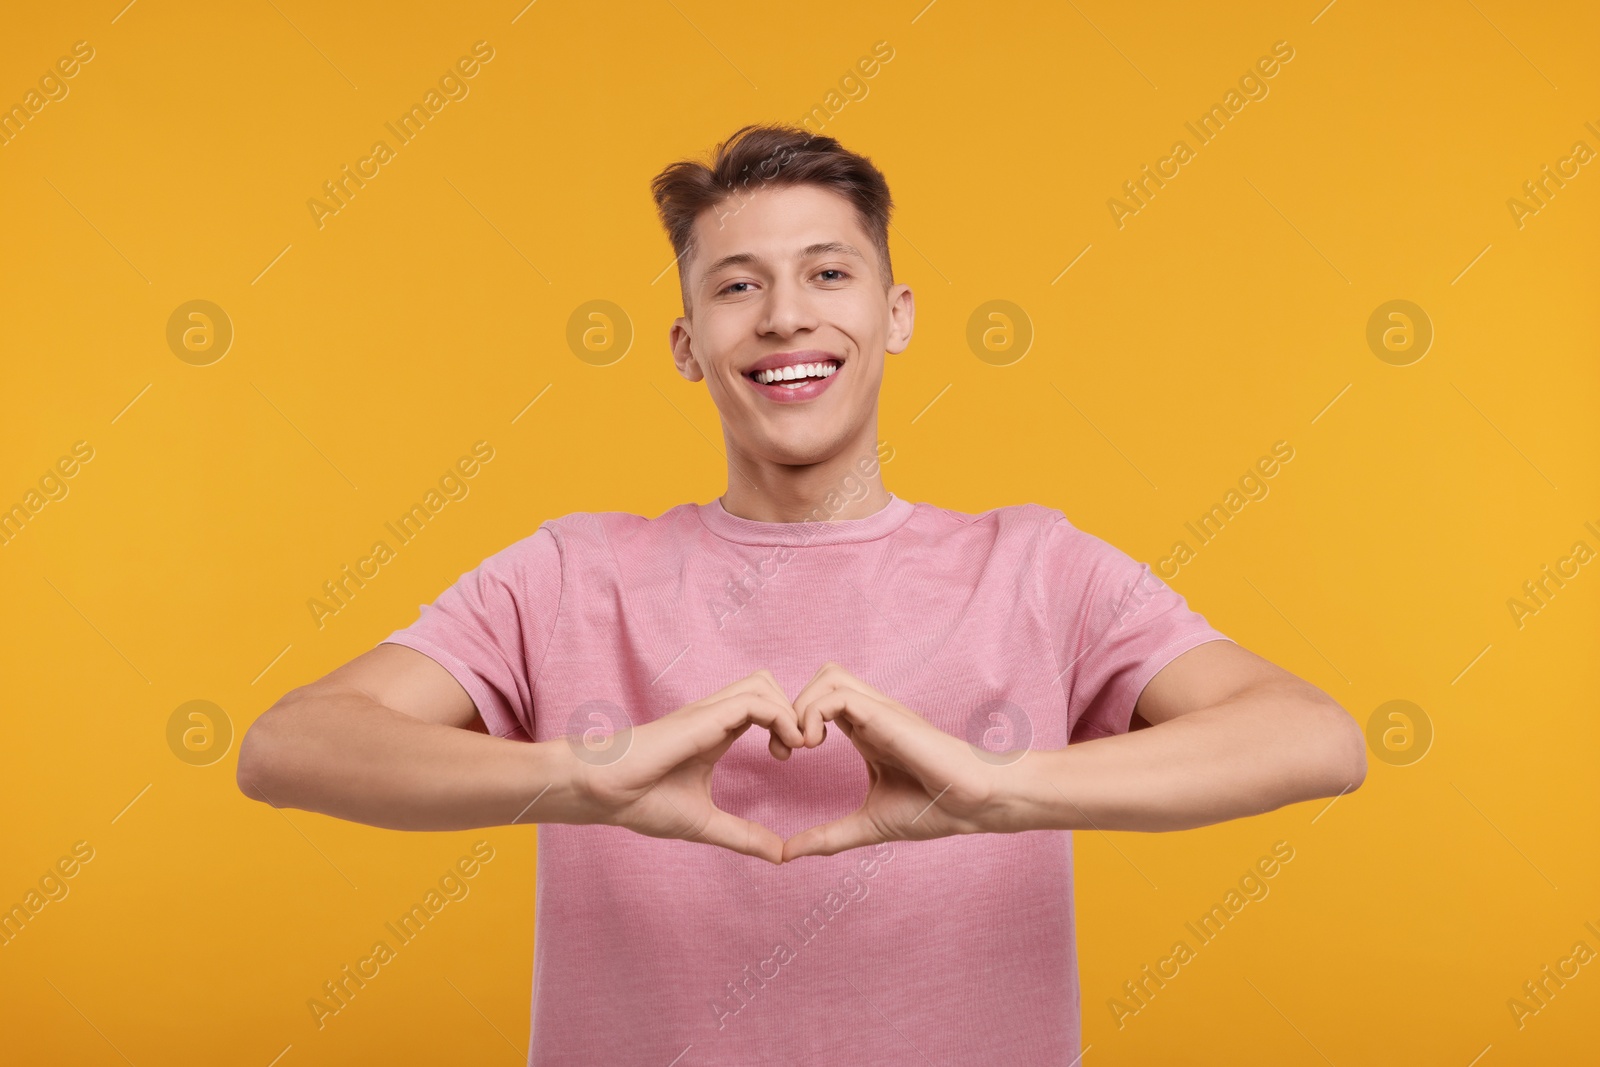 Photo of Happy man showing heart gesture with hands on orange background